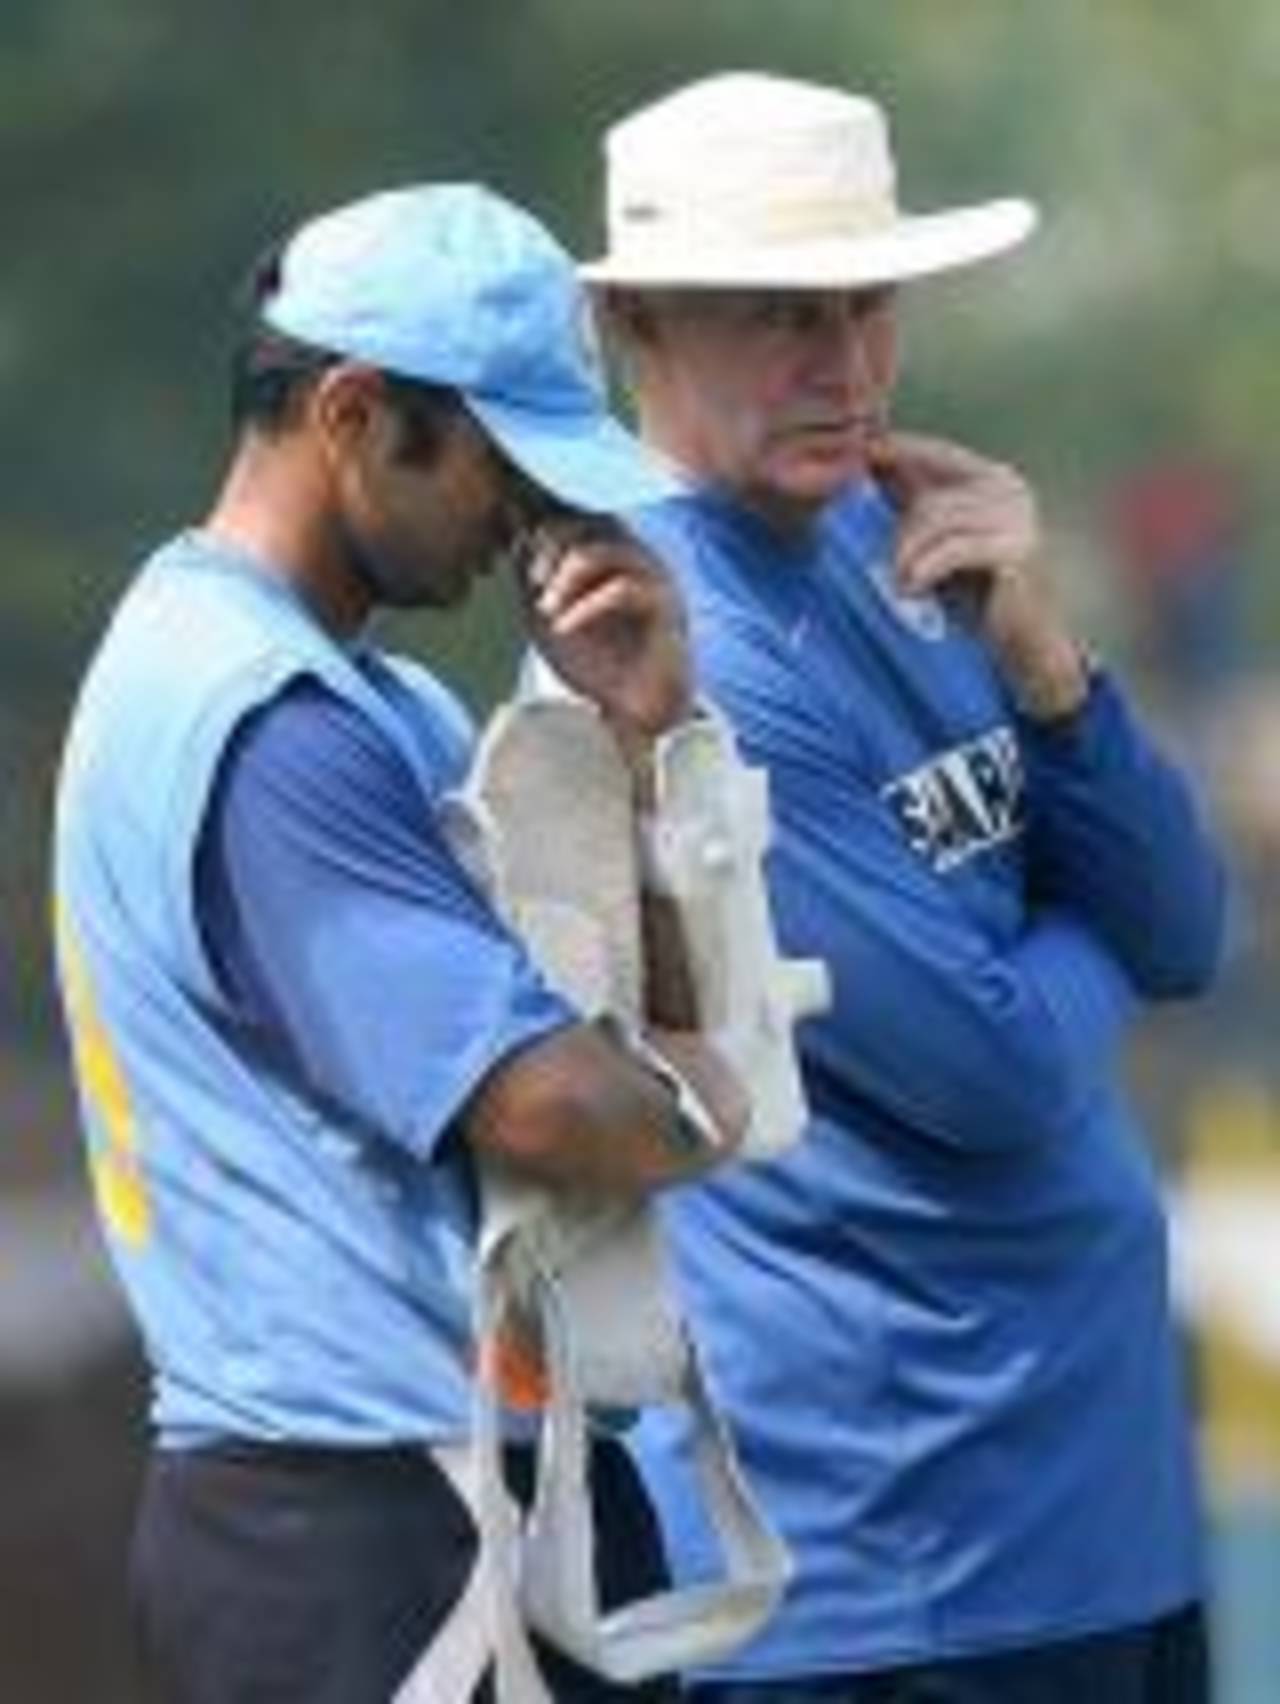 Rahul Dravid and Greg Chappell have a lot on their plate ahead of India's crucial match against Australia, Mohali, October 28, 2007